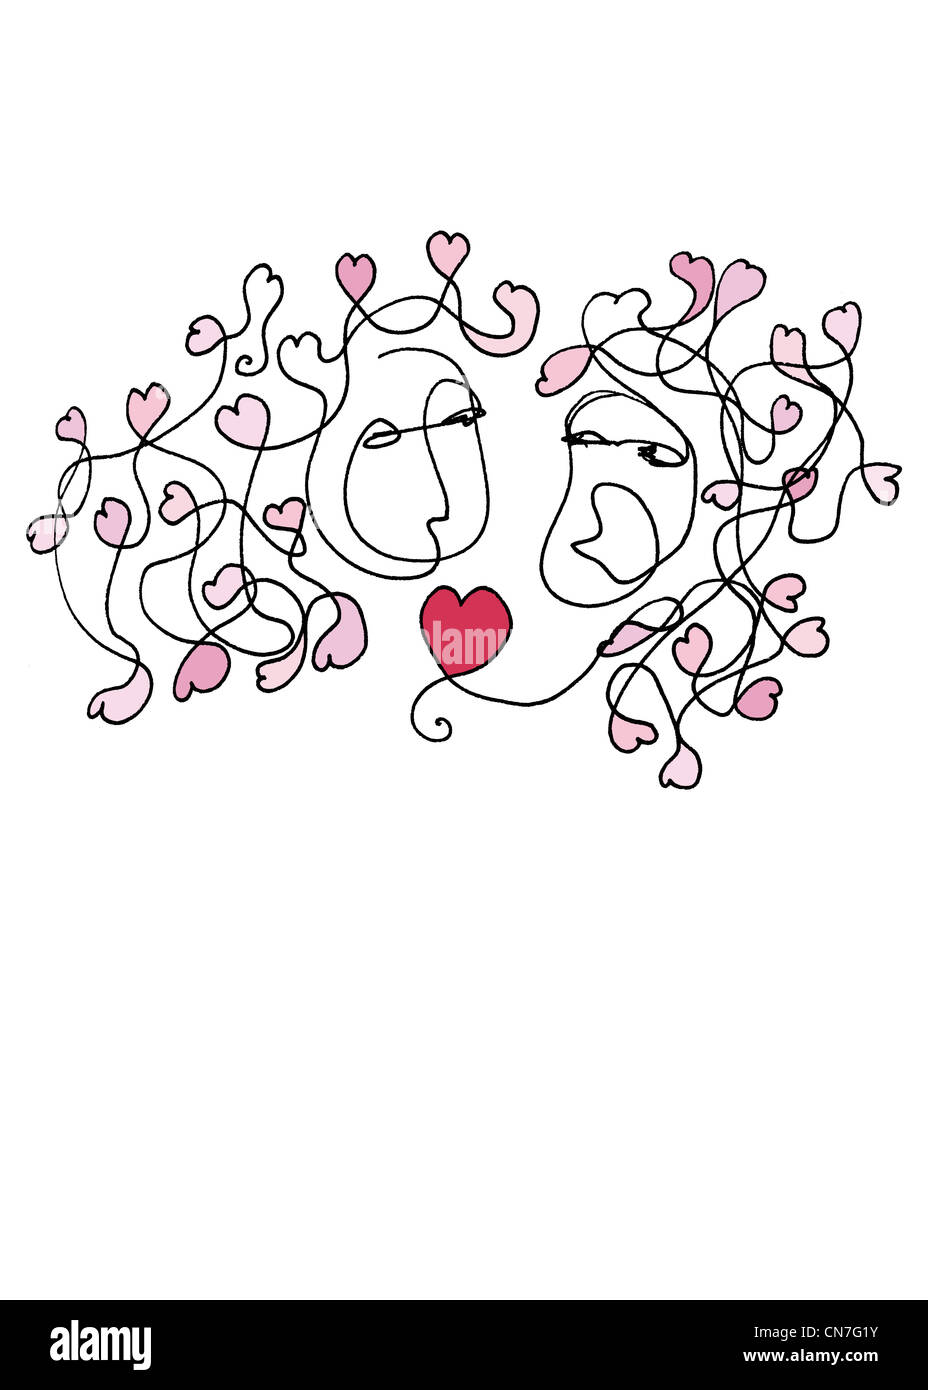 Couple in love with hearts around them. Stock Photo